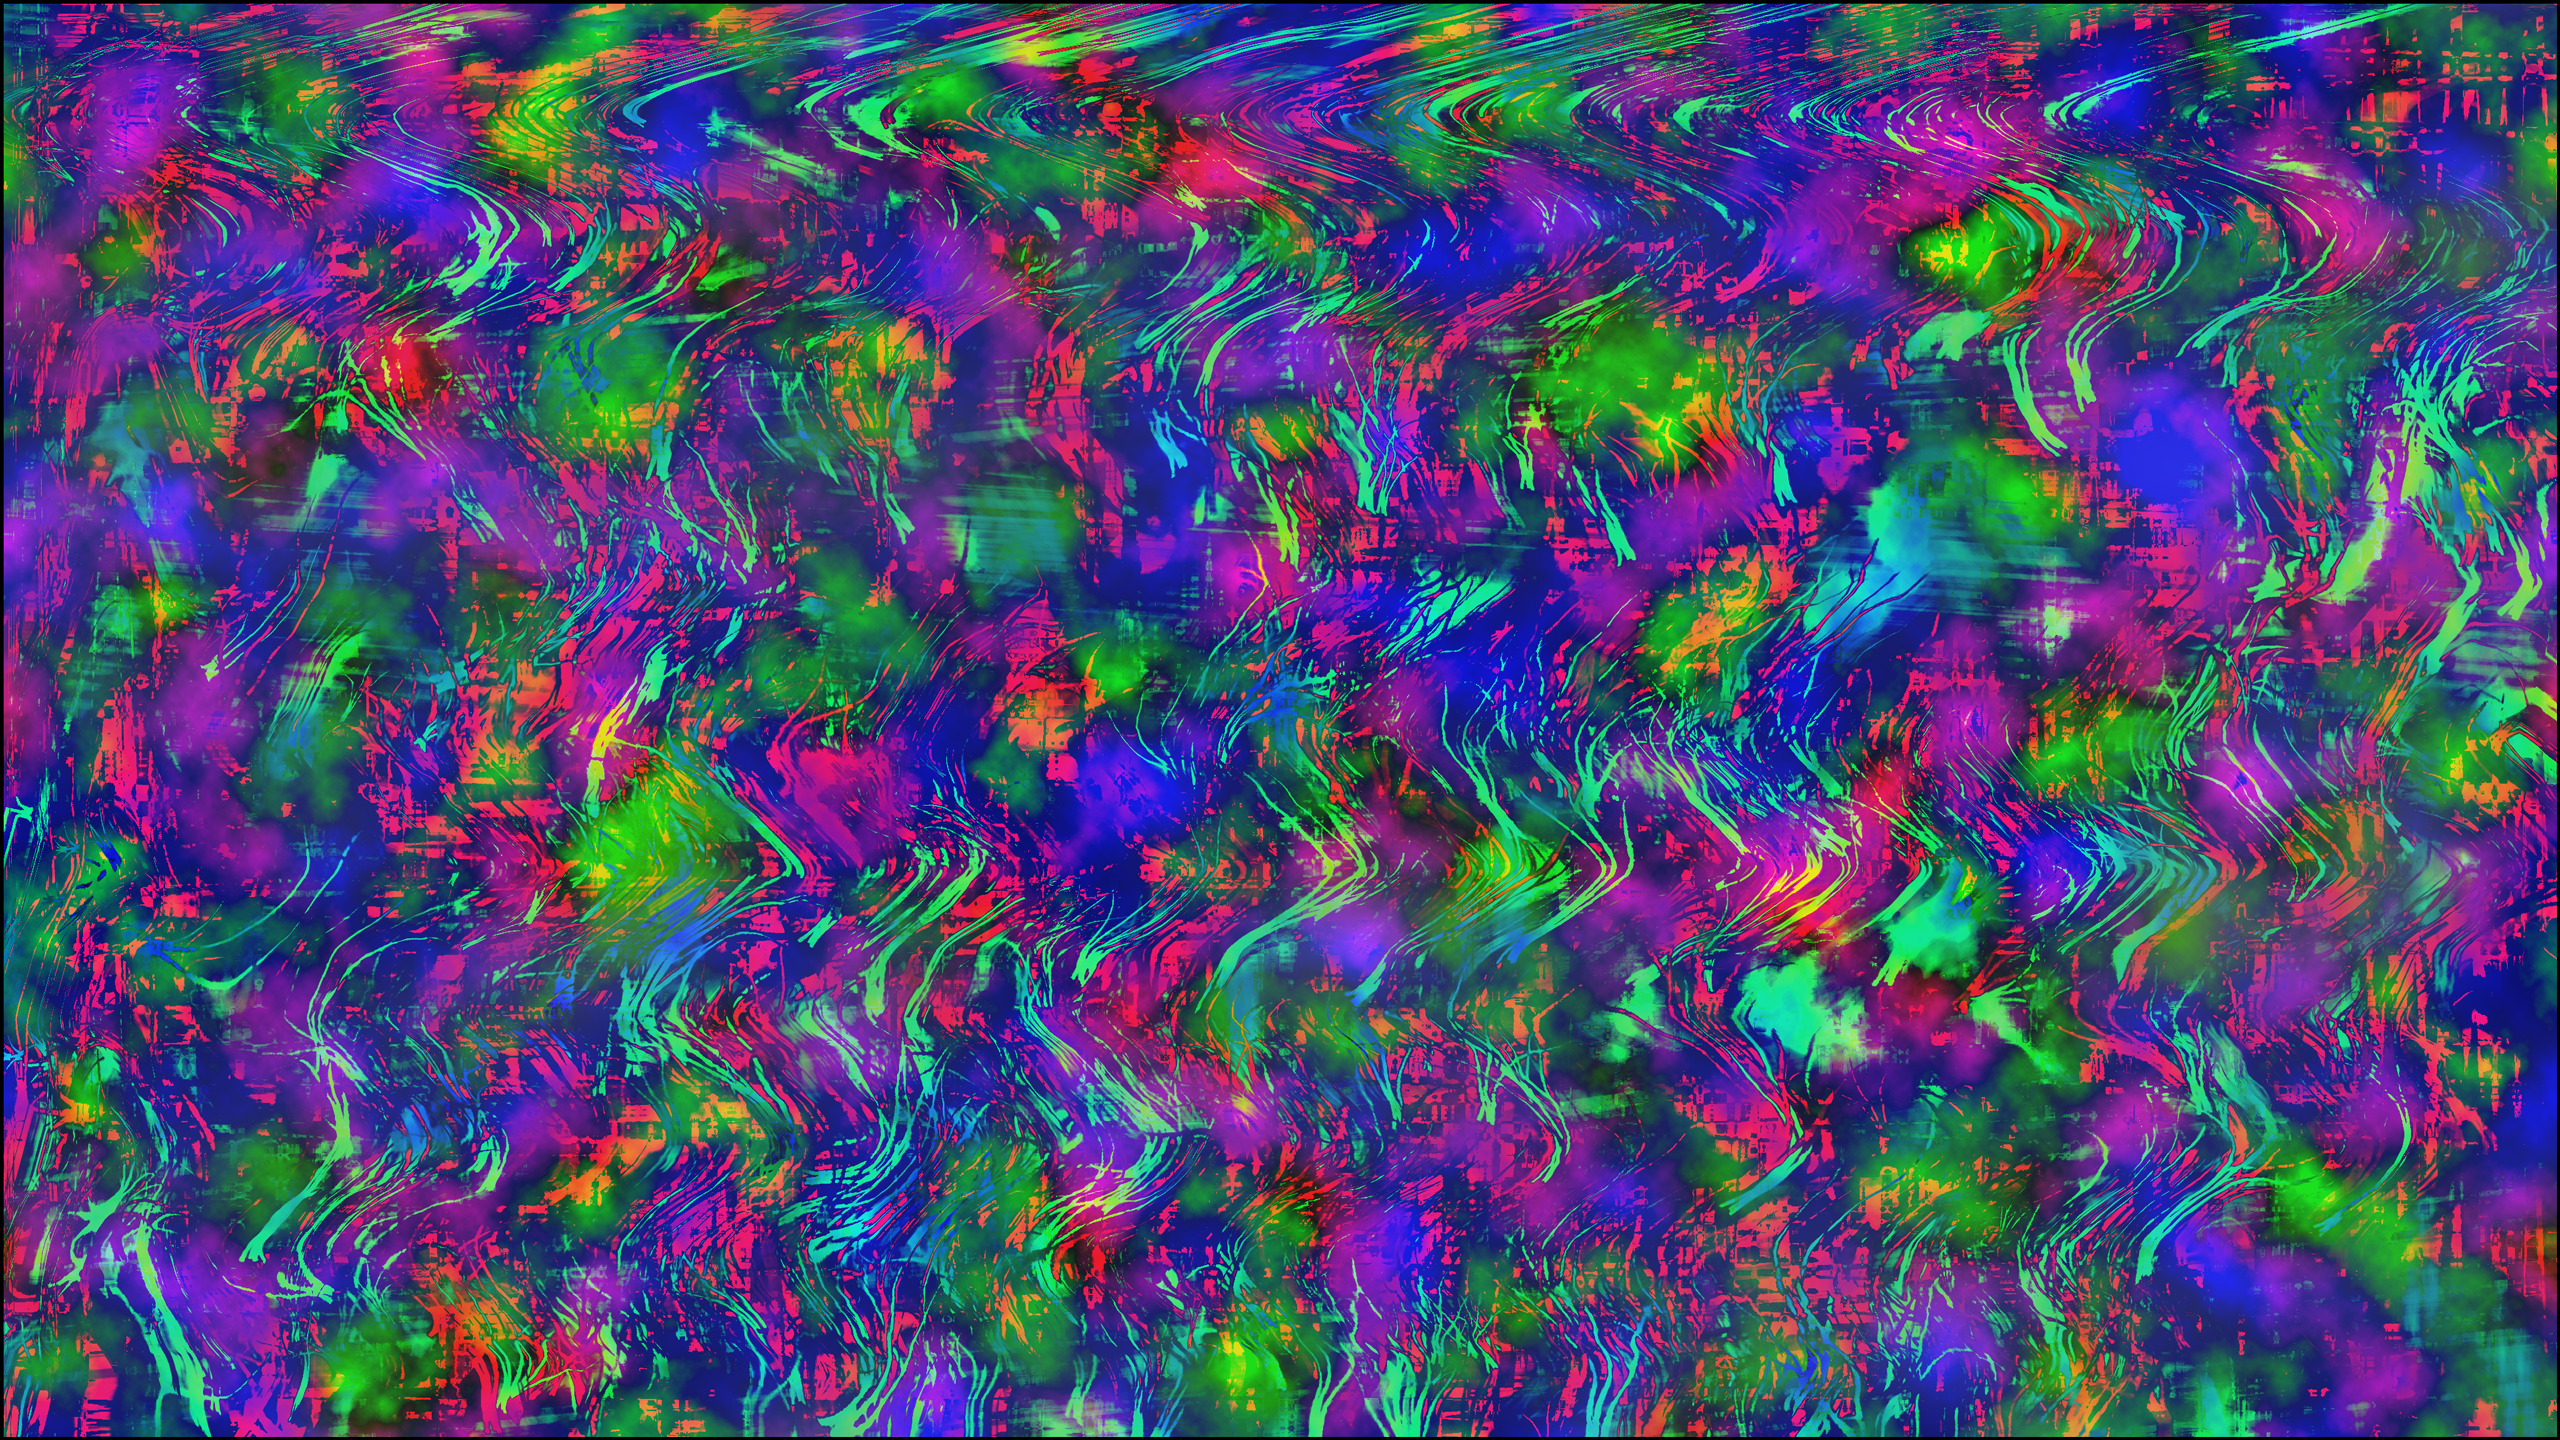 Abstract Digital Art Colorful Autostereogram 2560x1440